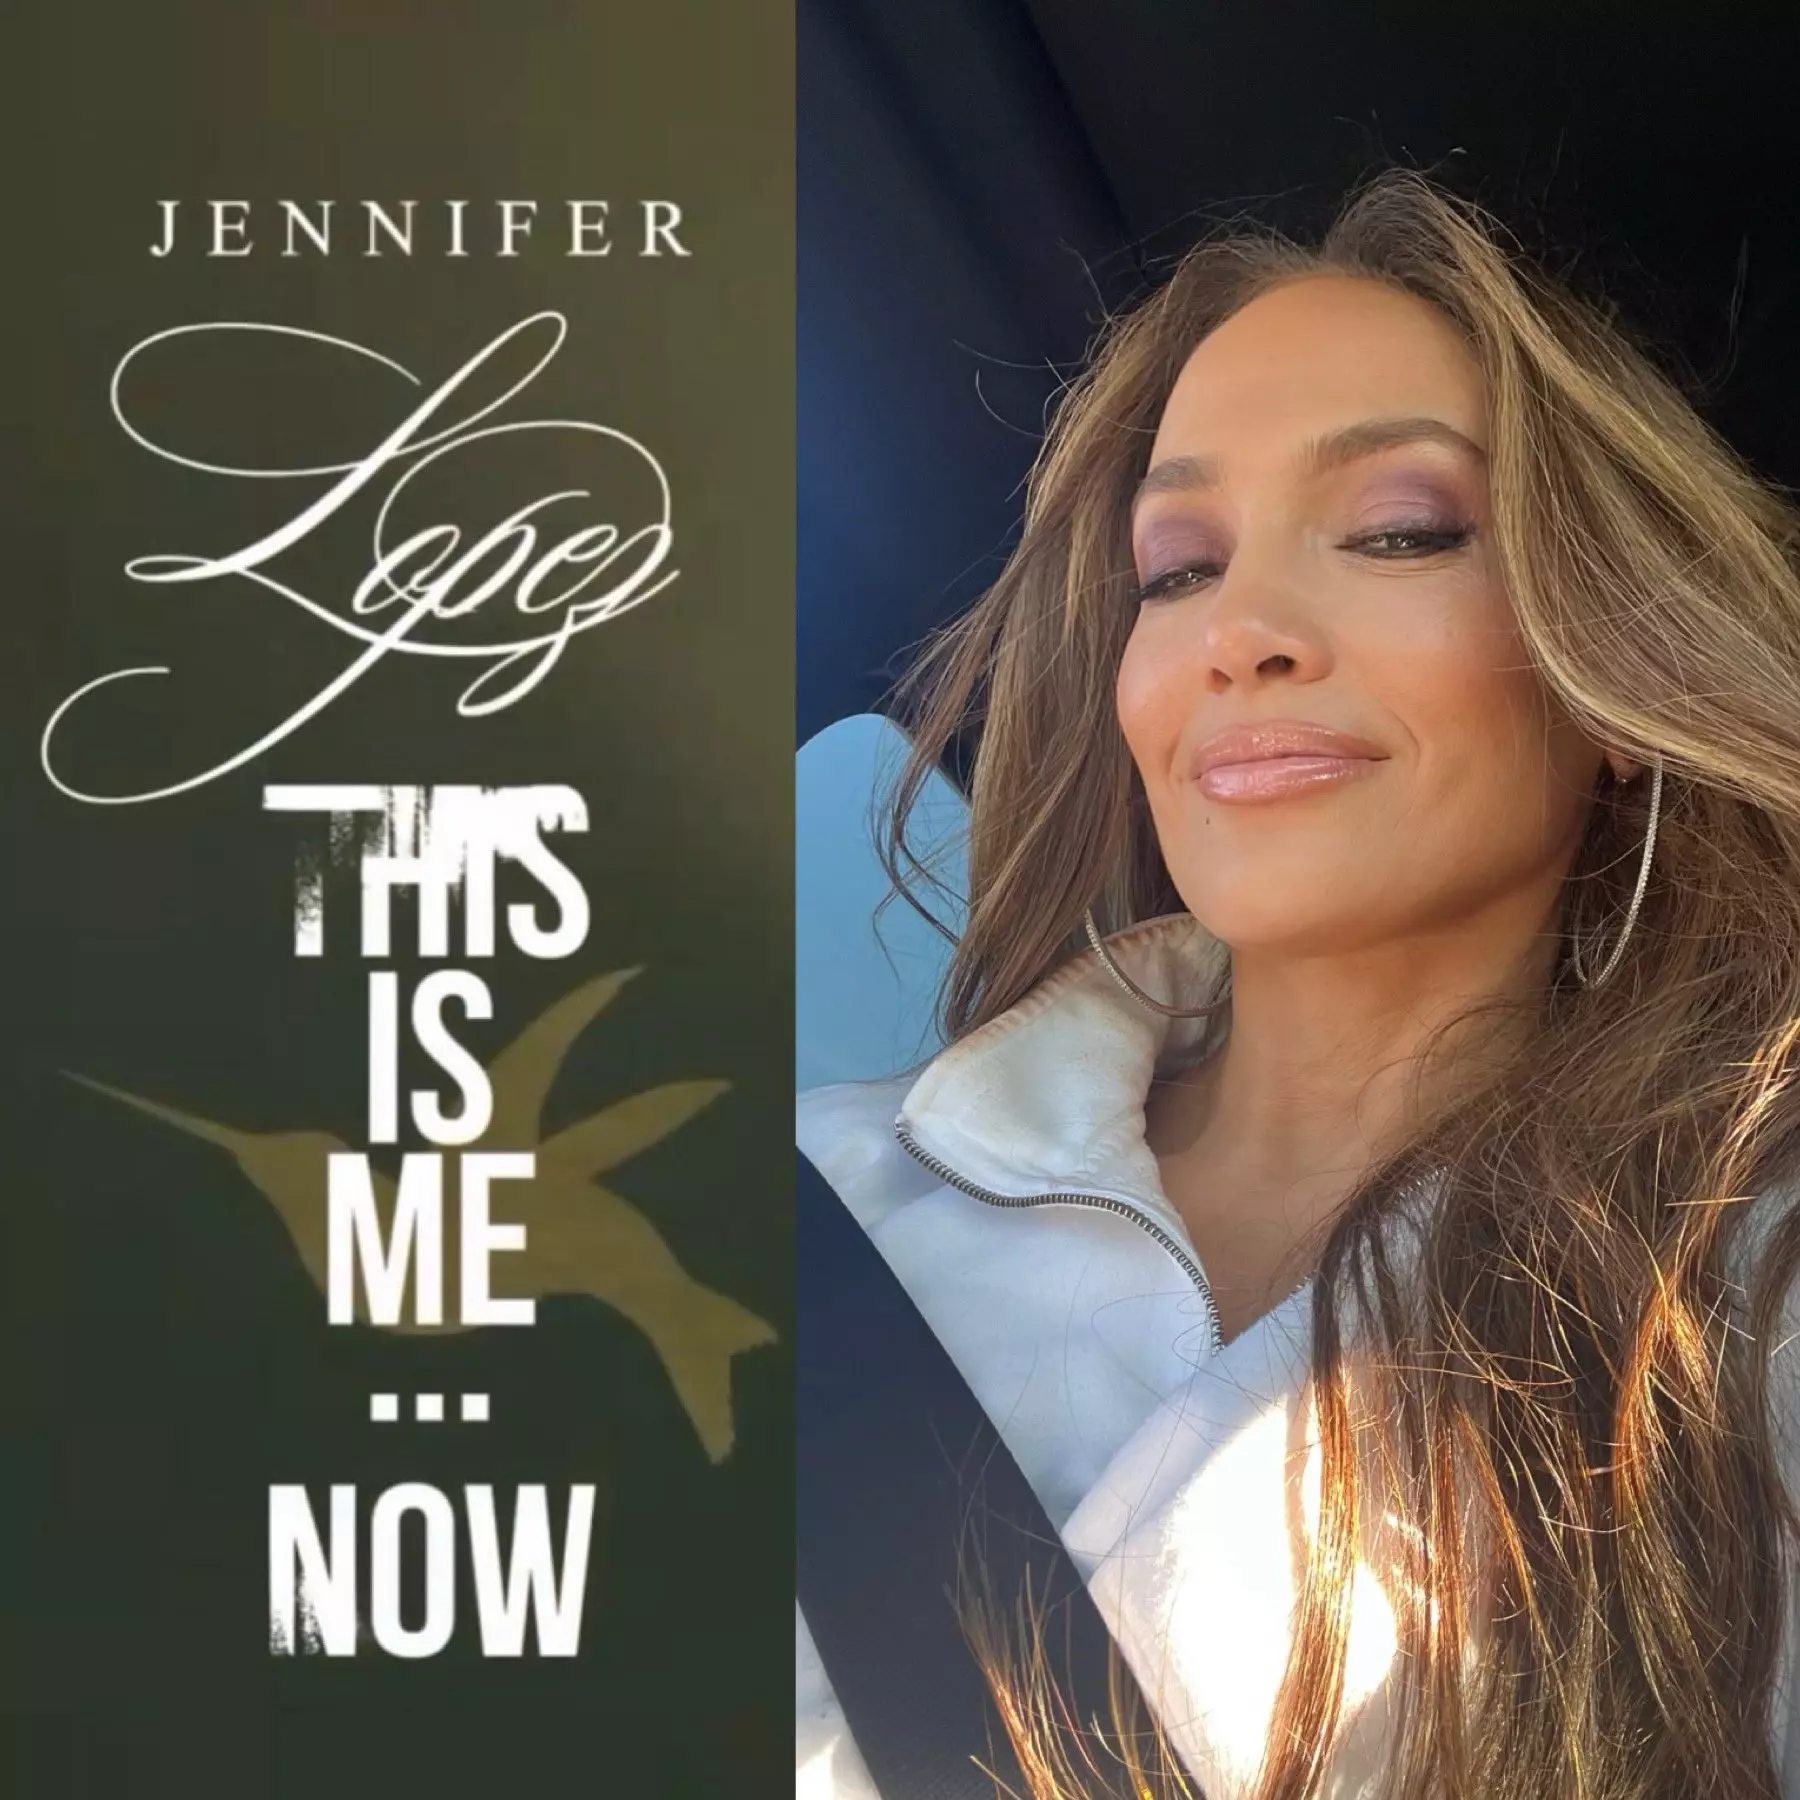 Jennifer Lopez’s album ‘This Is Me ... Now’ and film to release in Feb 24